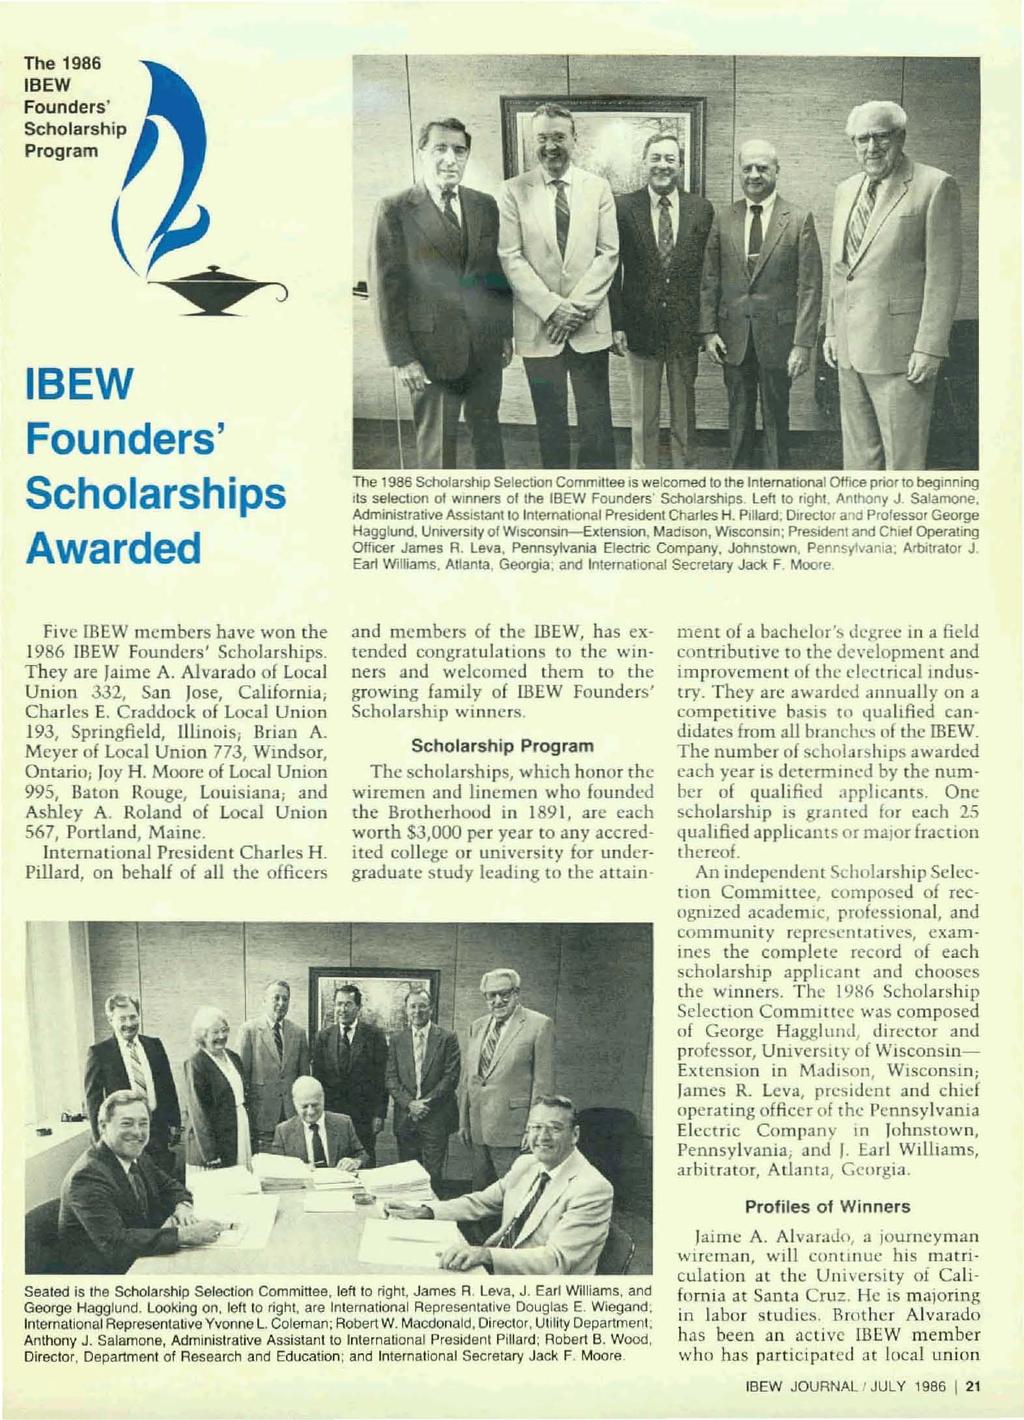 The 1986 IBEW Founders' Scholarship Program IBEW Founders' Scholarships Awarded The 1986 Scholarship Selection Committee IS welcomed to the Intemational ()tf1ce prior to beginning Its selection 01